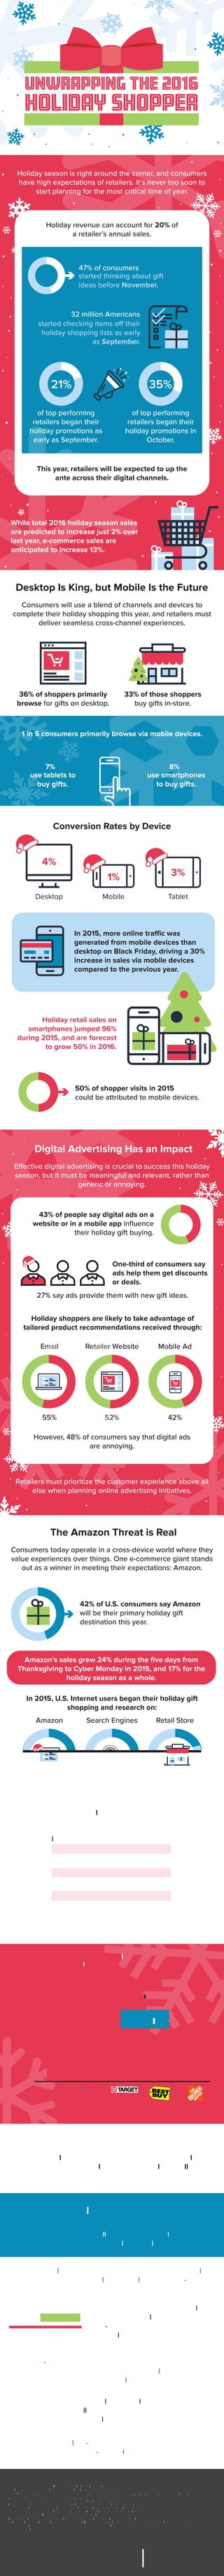 4%
3%1%
Email Retailer Website Mobile Ad
55% 52% 42%
Amazon Search Engines Retail Store
35% 23% 20%
Consumers like Amazon ...